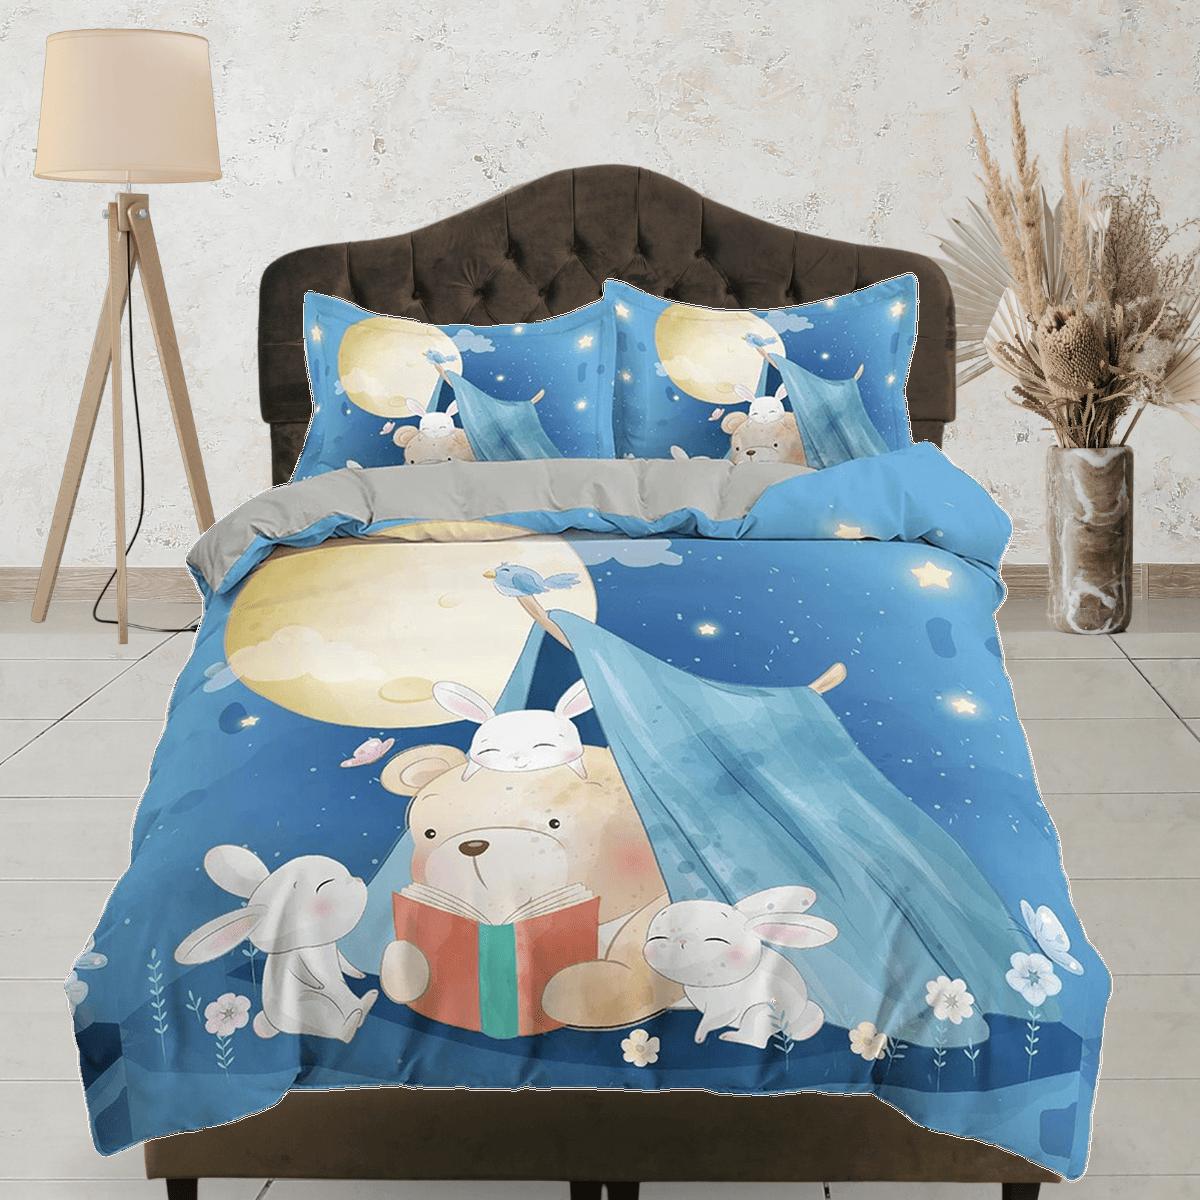 daintyduvet Cute teddy bear and bunny night camp toddler bedding, duvet cover for nursery kids, crib bedding, baby zipper bedding, king queen full twin